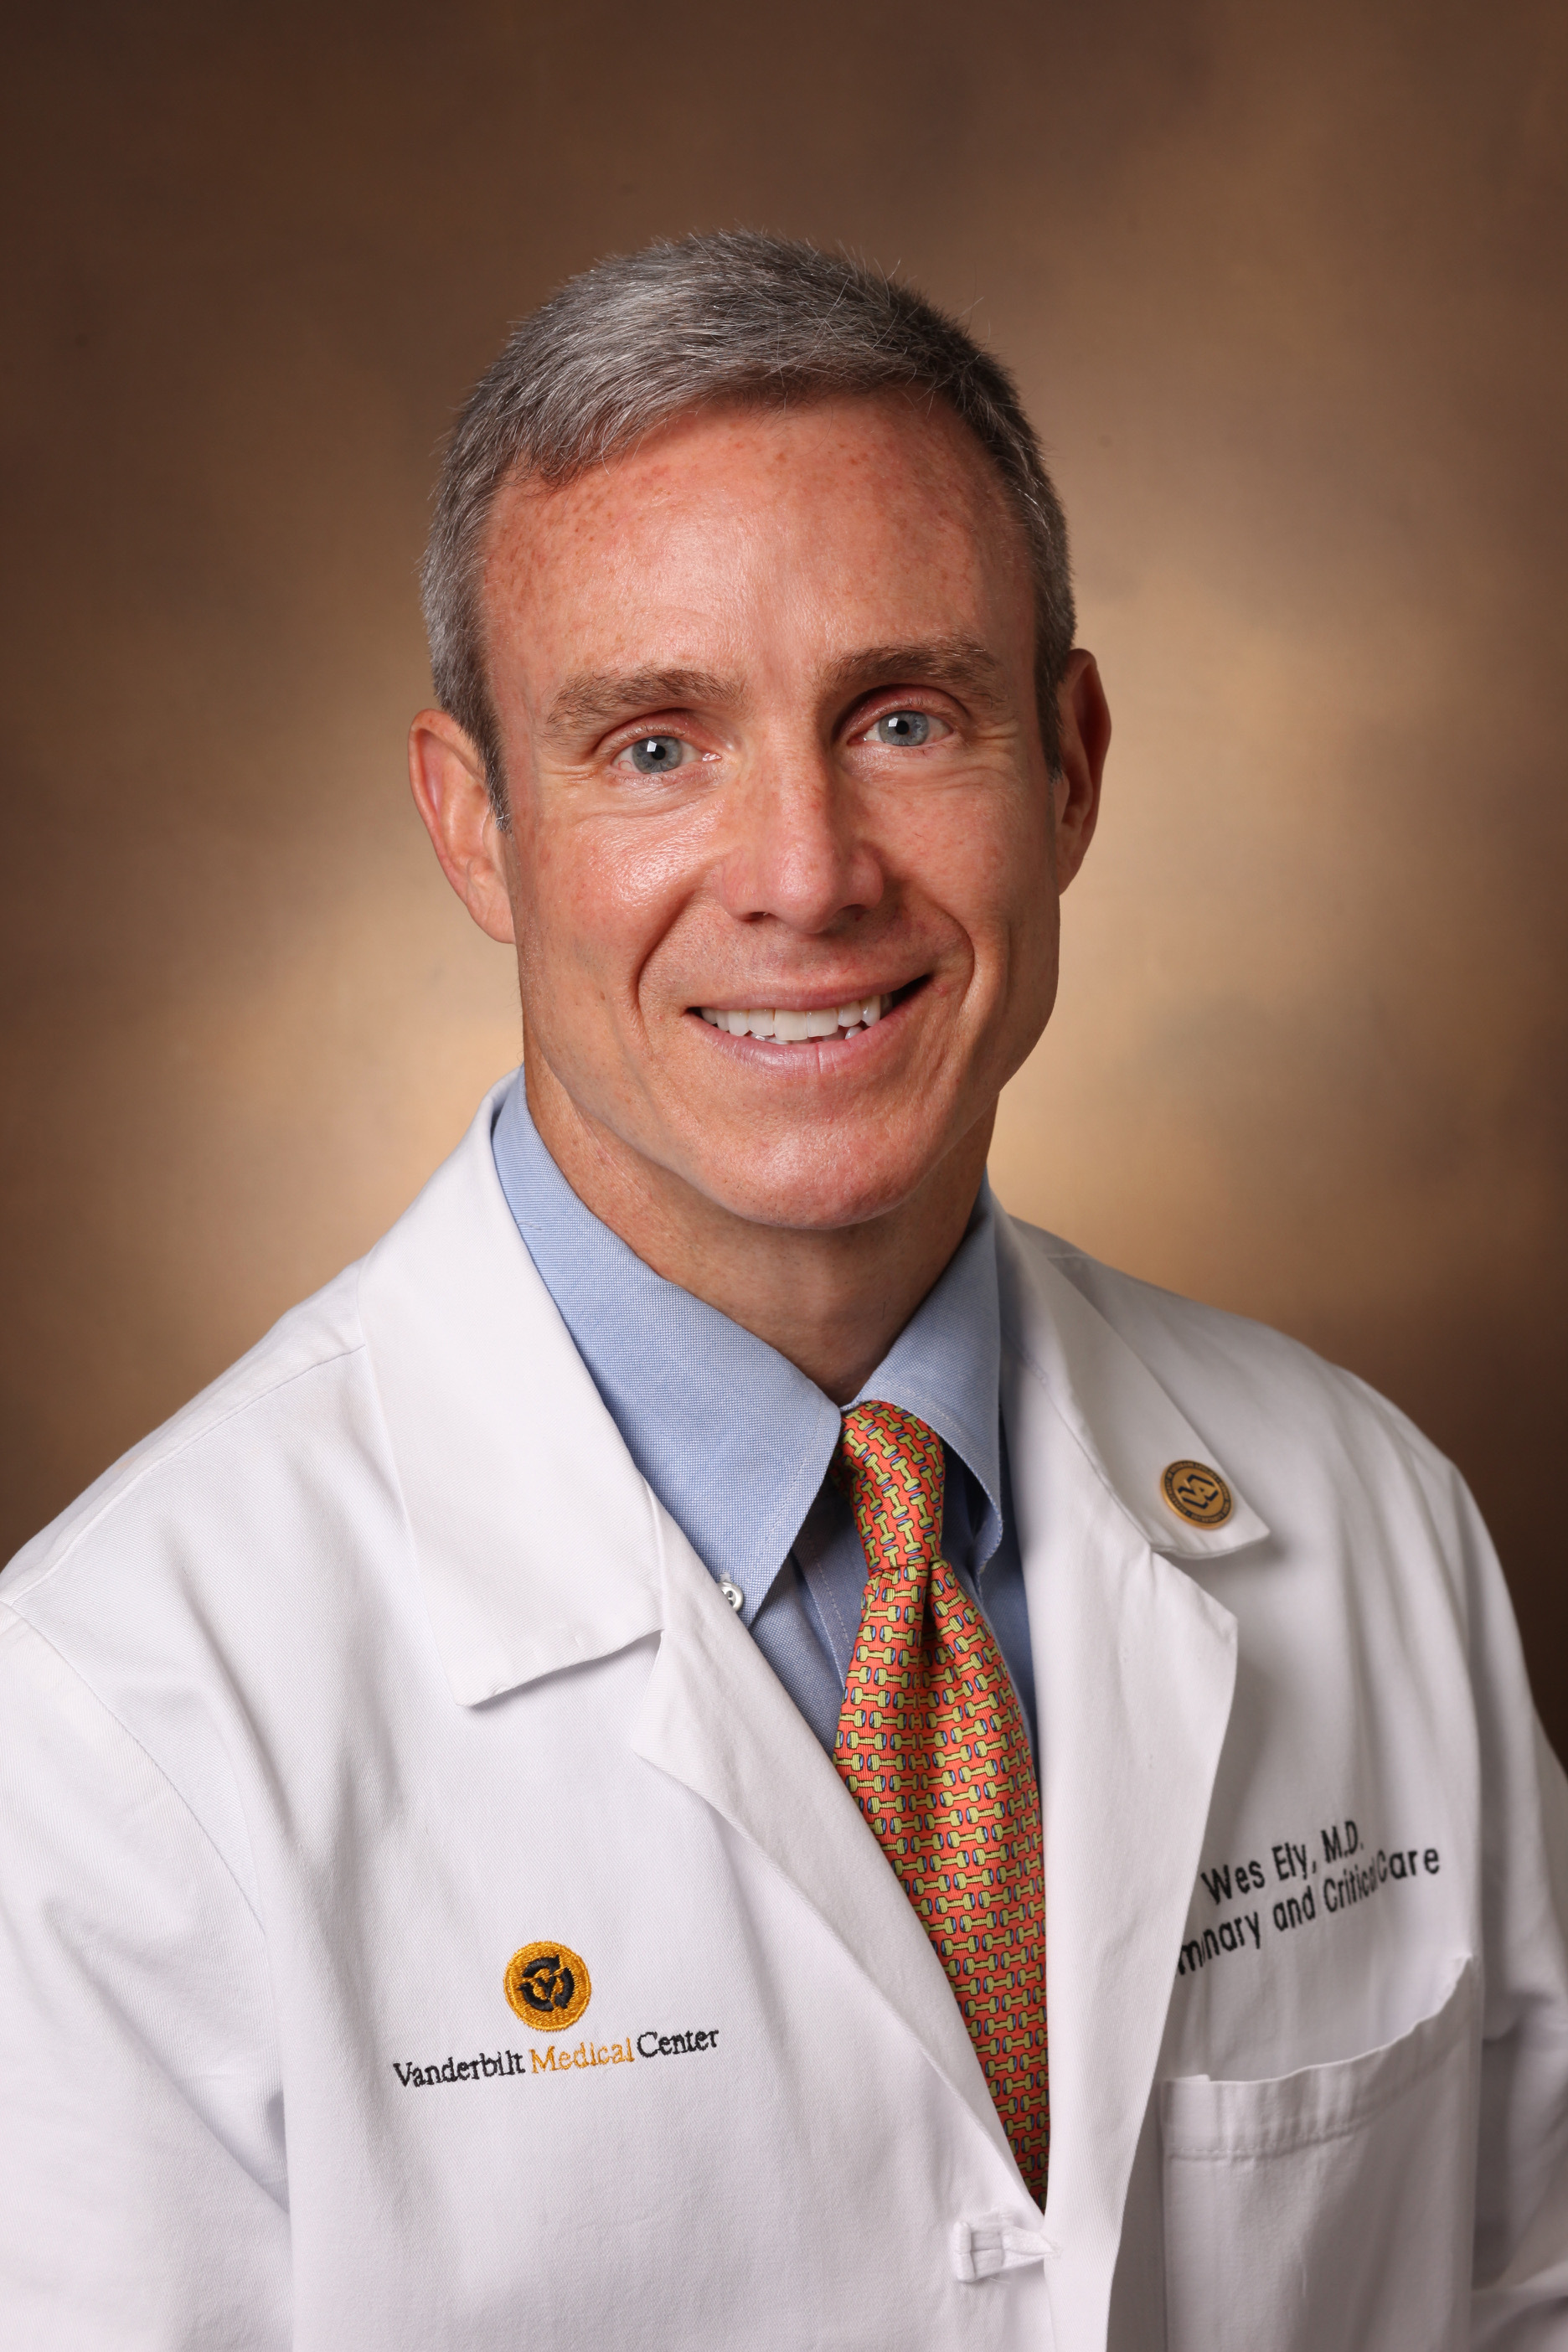 E. Wesley Ely, MD, MPH